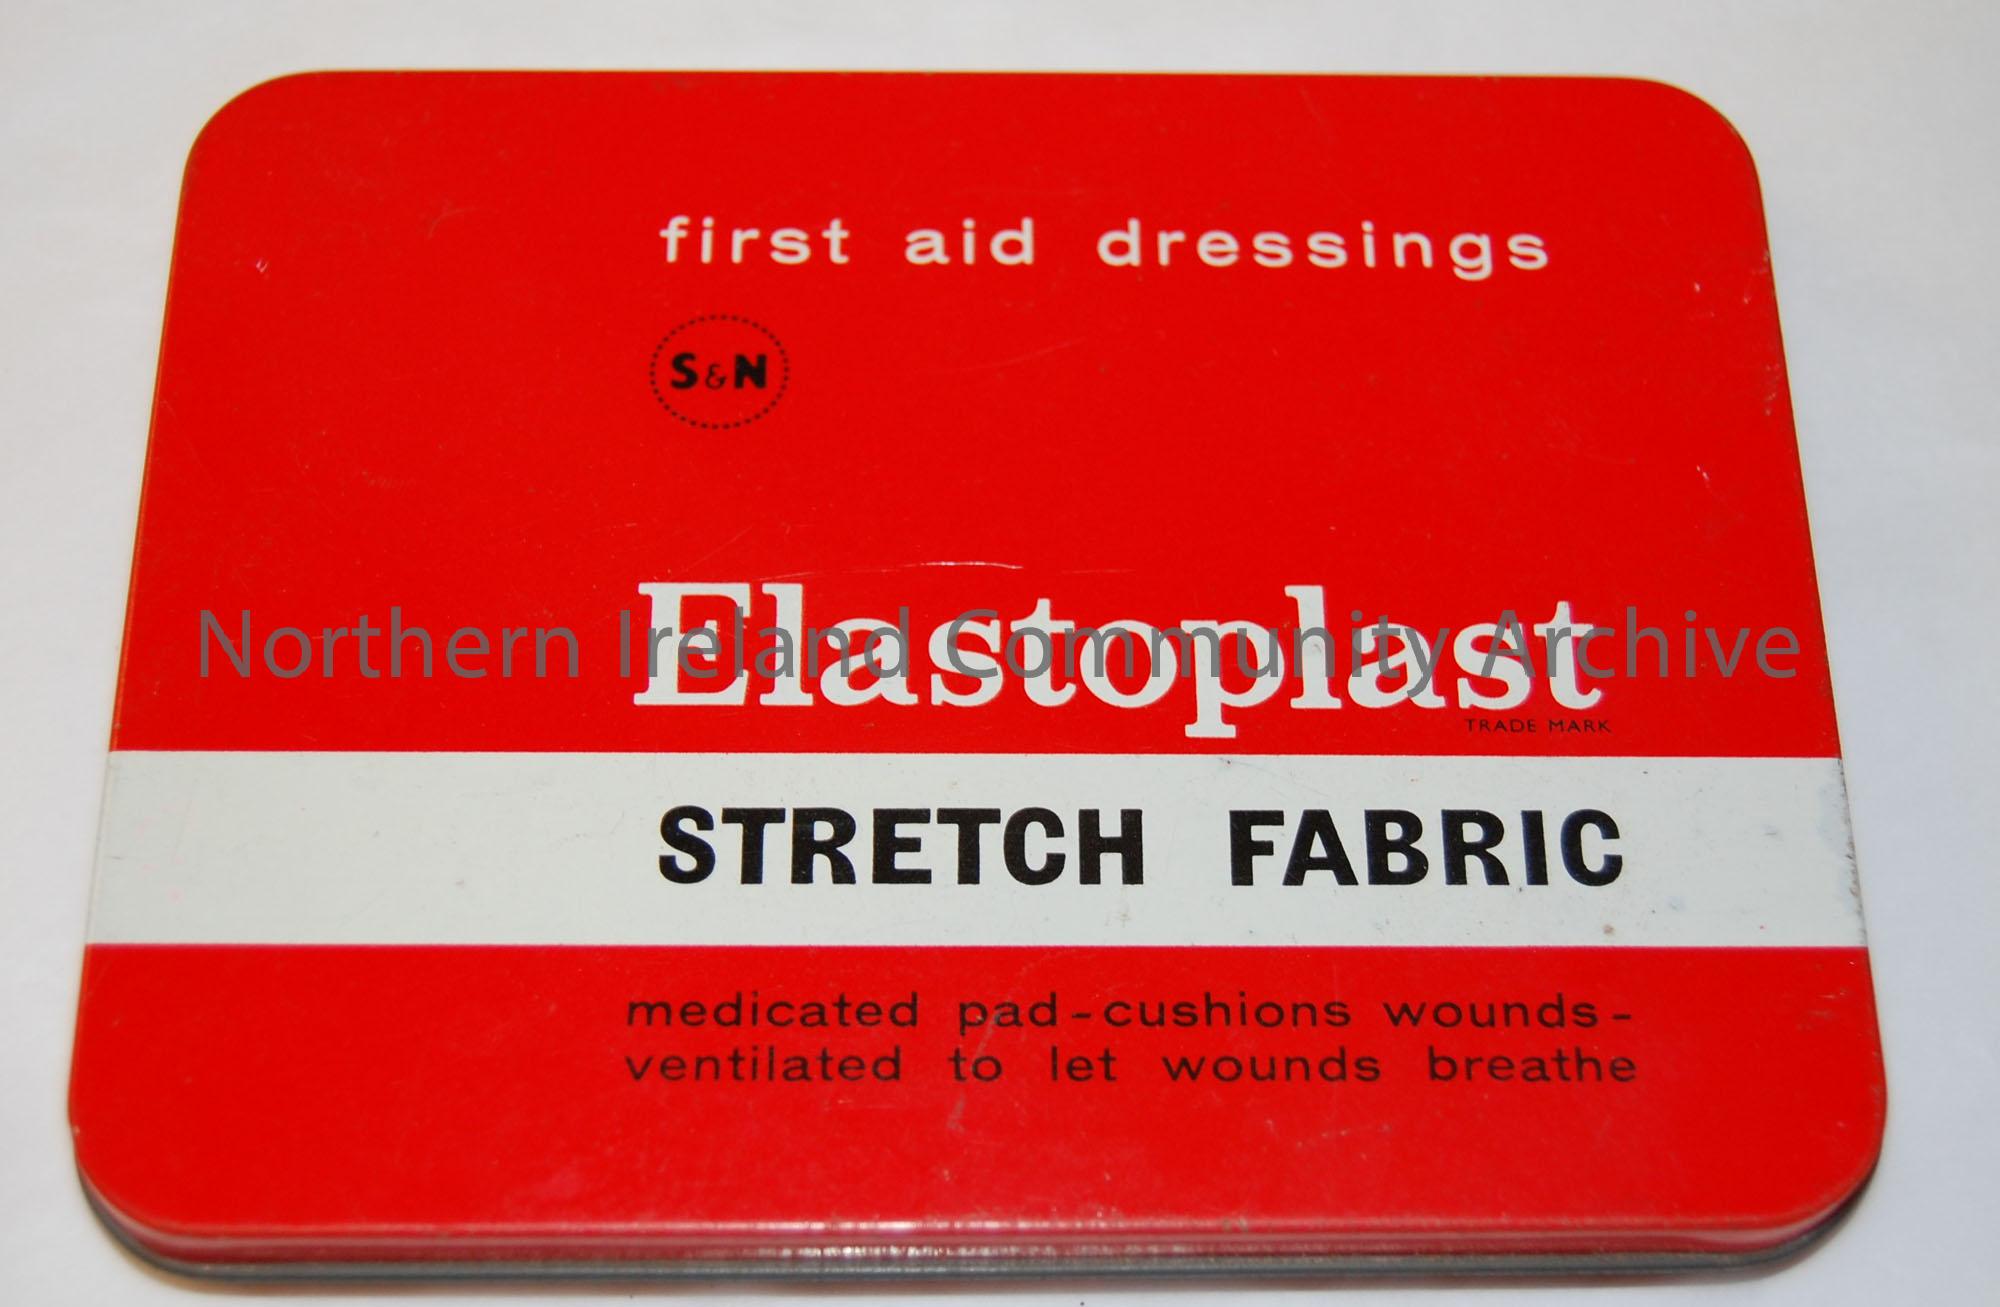 ‘First aid dressings/Elastoplast/Stretch Fabric..’. Thin flat tin container for plasters. Red background, with black and white print. c.1960s